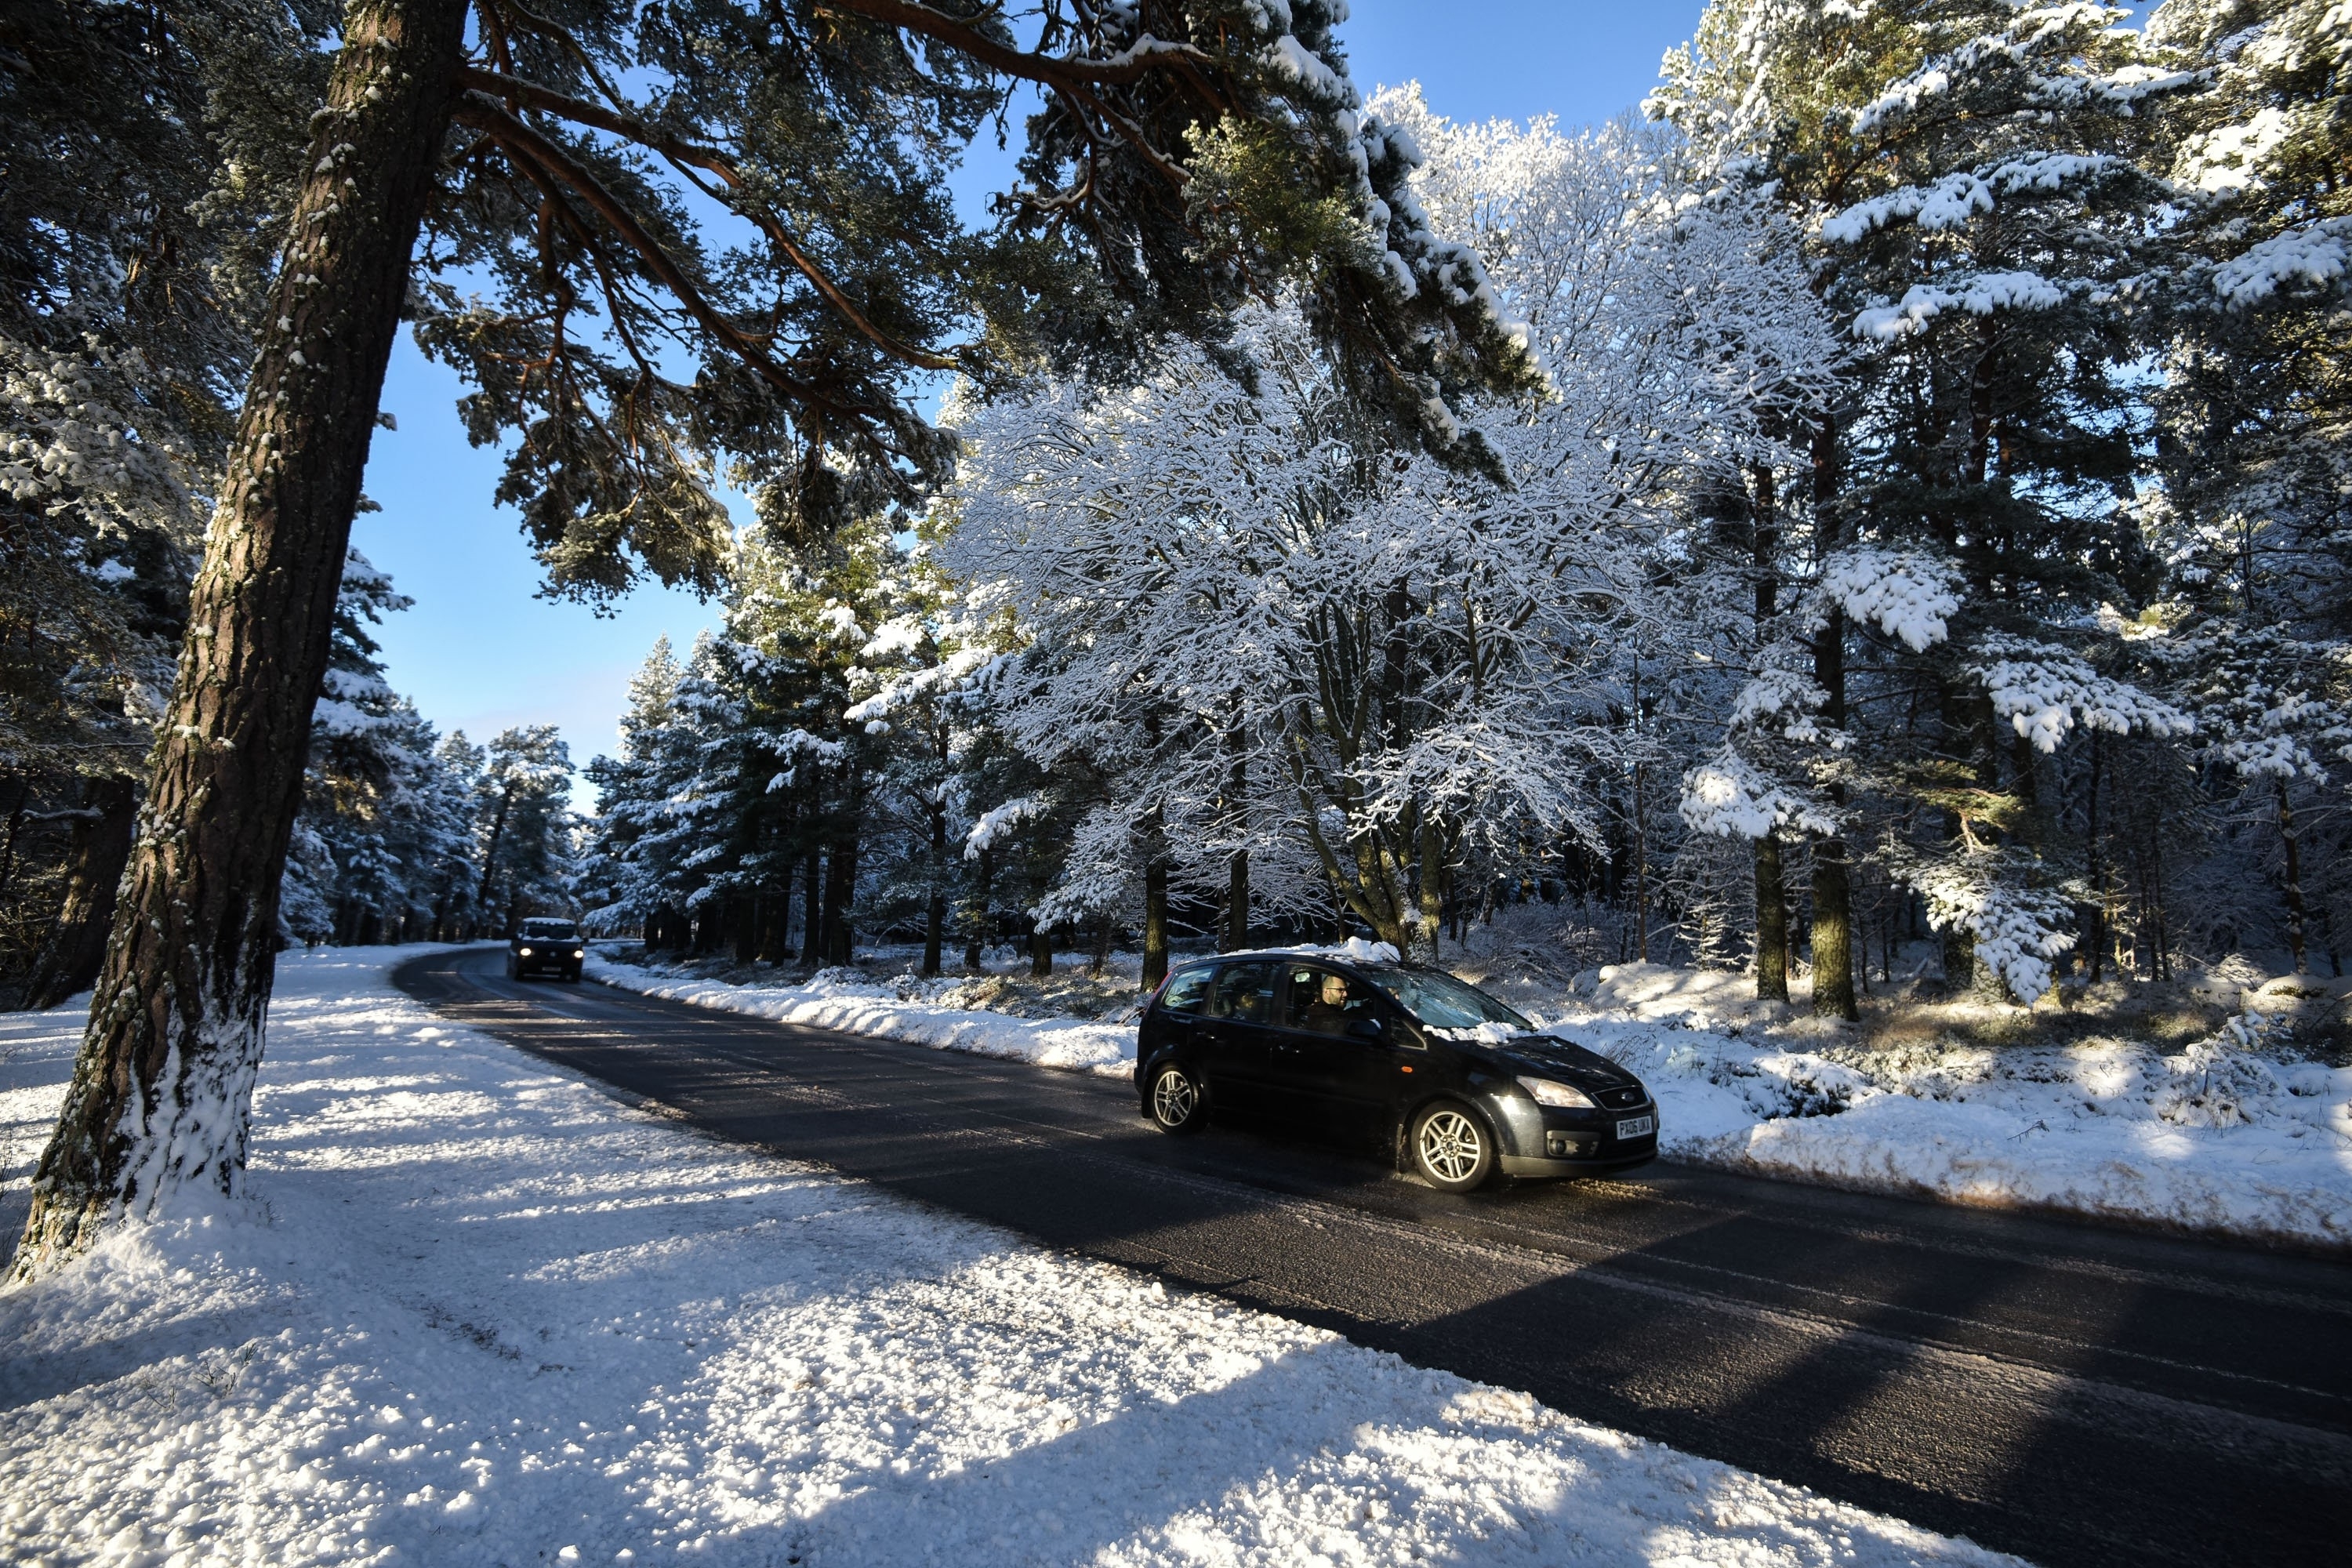 A car is seen driving along a snowy tree lined road near Aviemore, Scotland on December 14 2015. Last night, Sunday, Scotland's coldest temperature for this Winter was recorded in Dalwhinnie at -8.7C. Up to 15cm of snow fell in Aviemore overnight and local schools were closed.